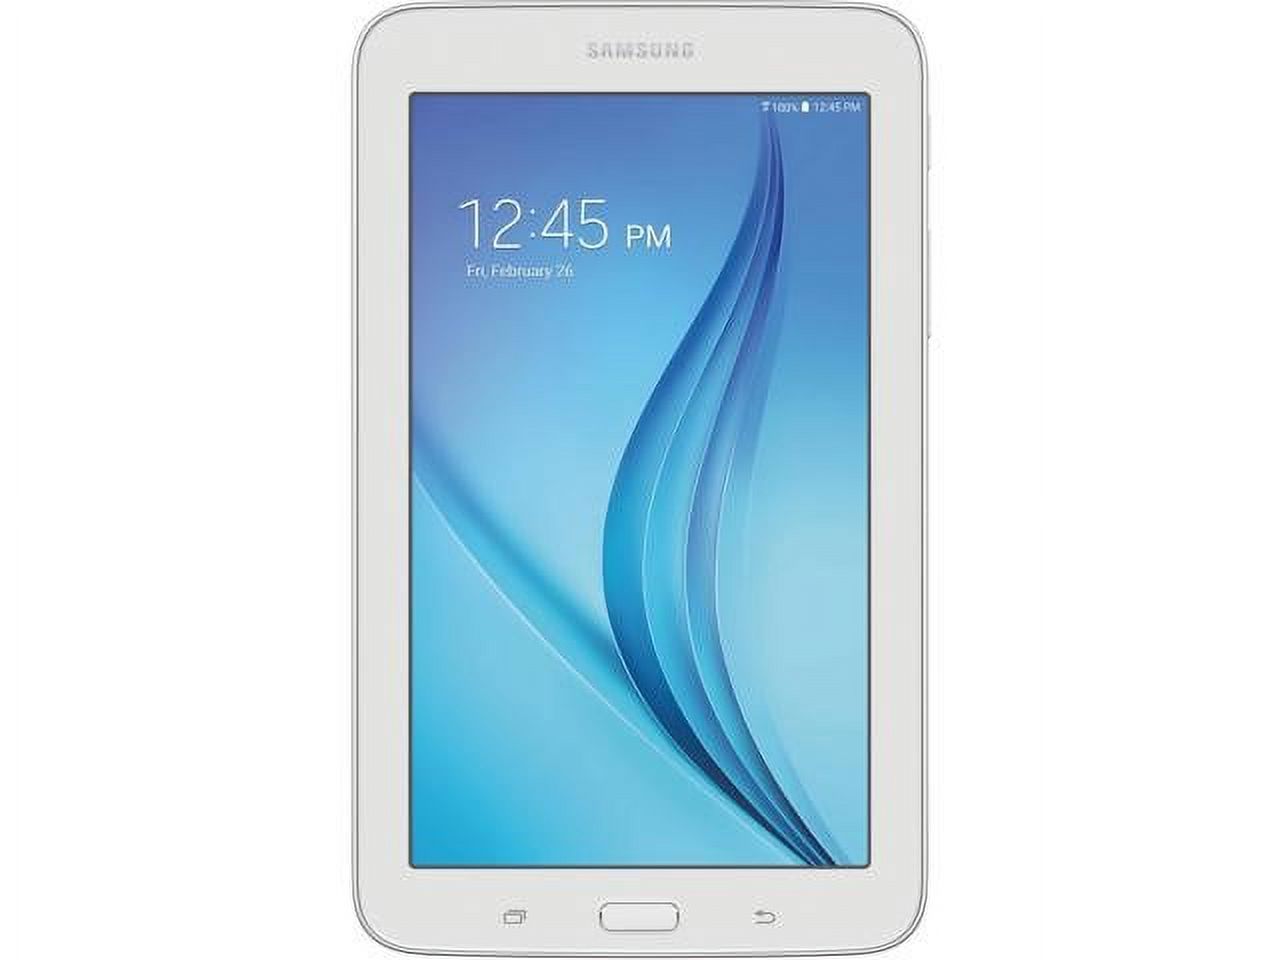 Samsung Galaxy Tab E Lite 7" 8GB Tablet - Android 4.4 (KitKat) - image 1 of 9